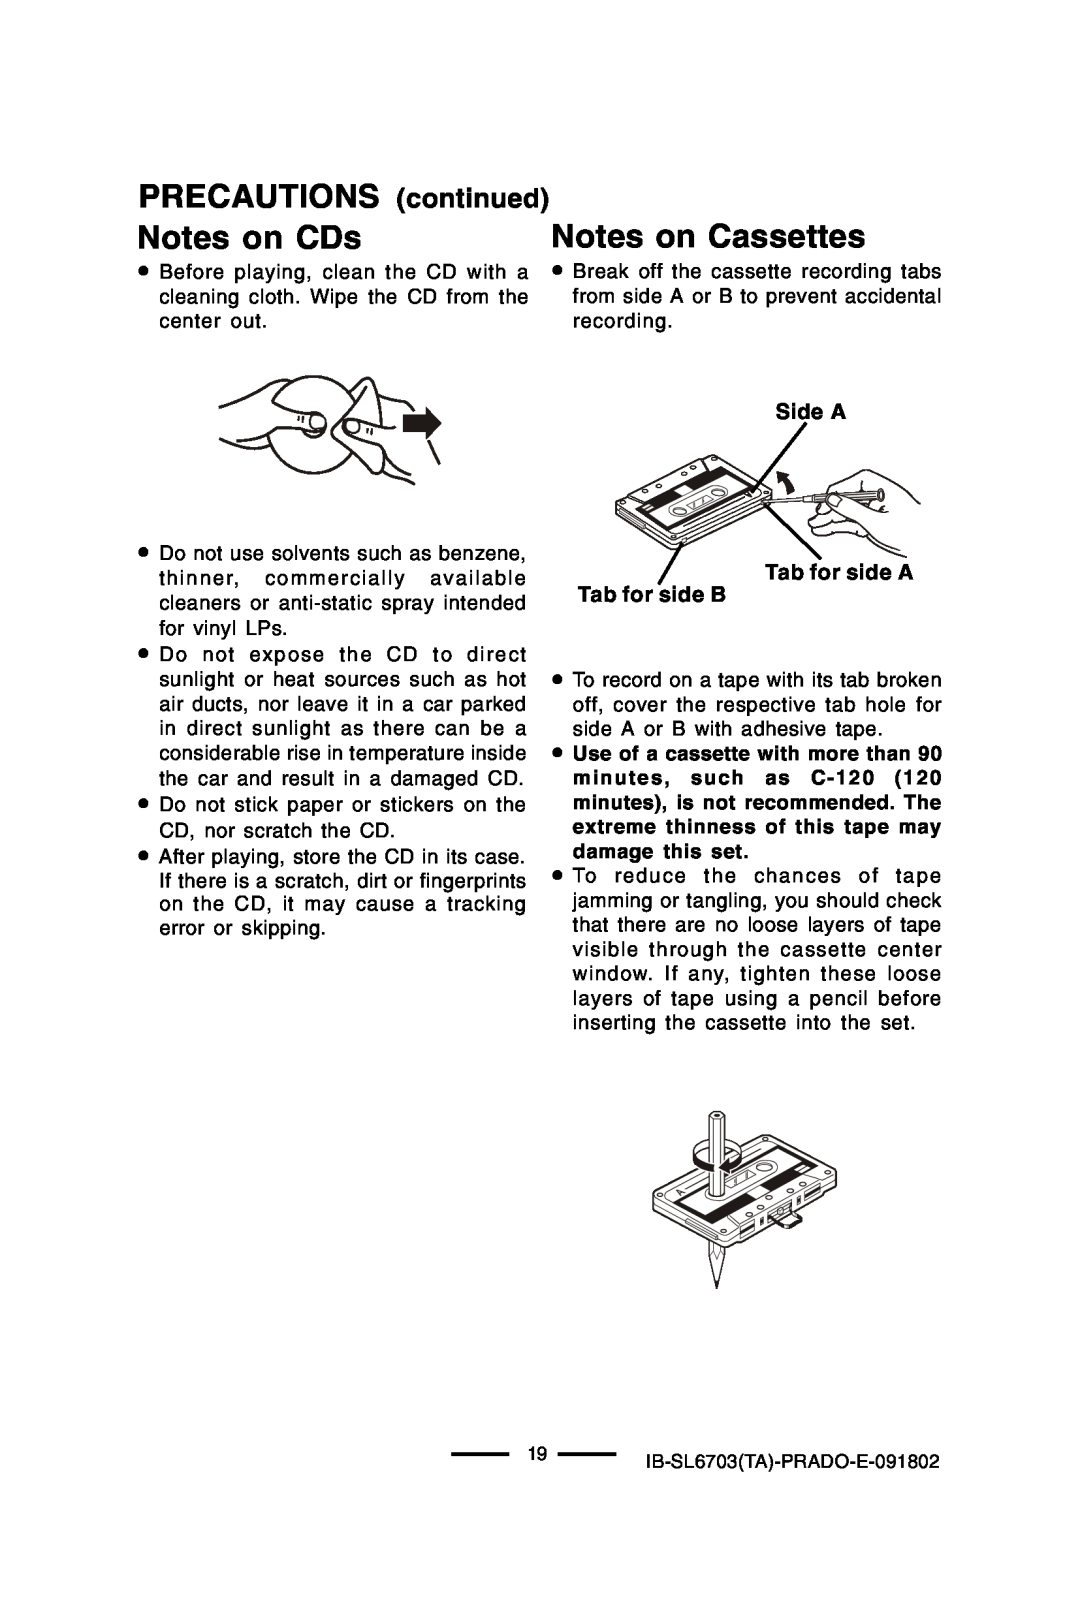 Lenoxx Electronics SL-6703 PRECAUTIONS continued, Notes on CDs, Notes on Cassettes, Side A Tab for side A Tab for side B 